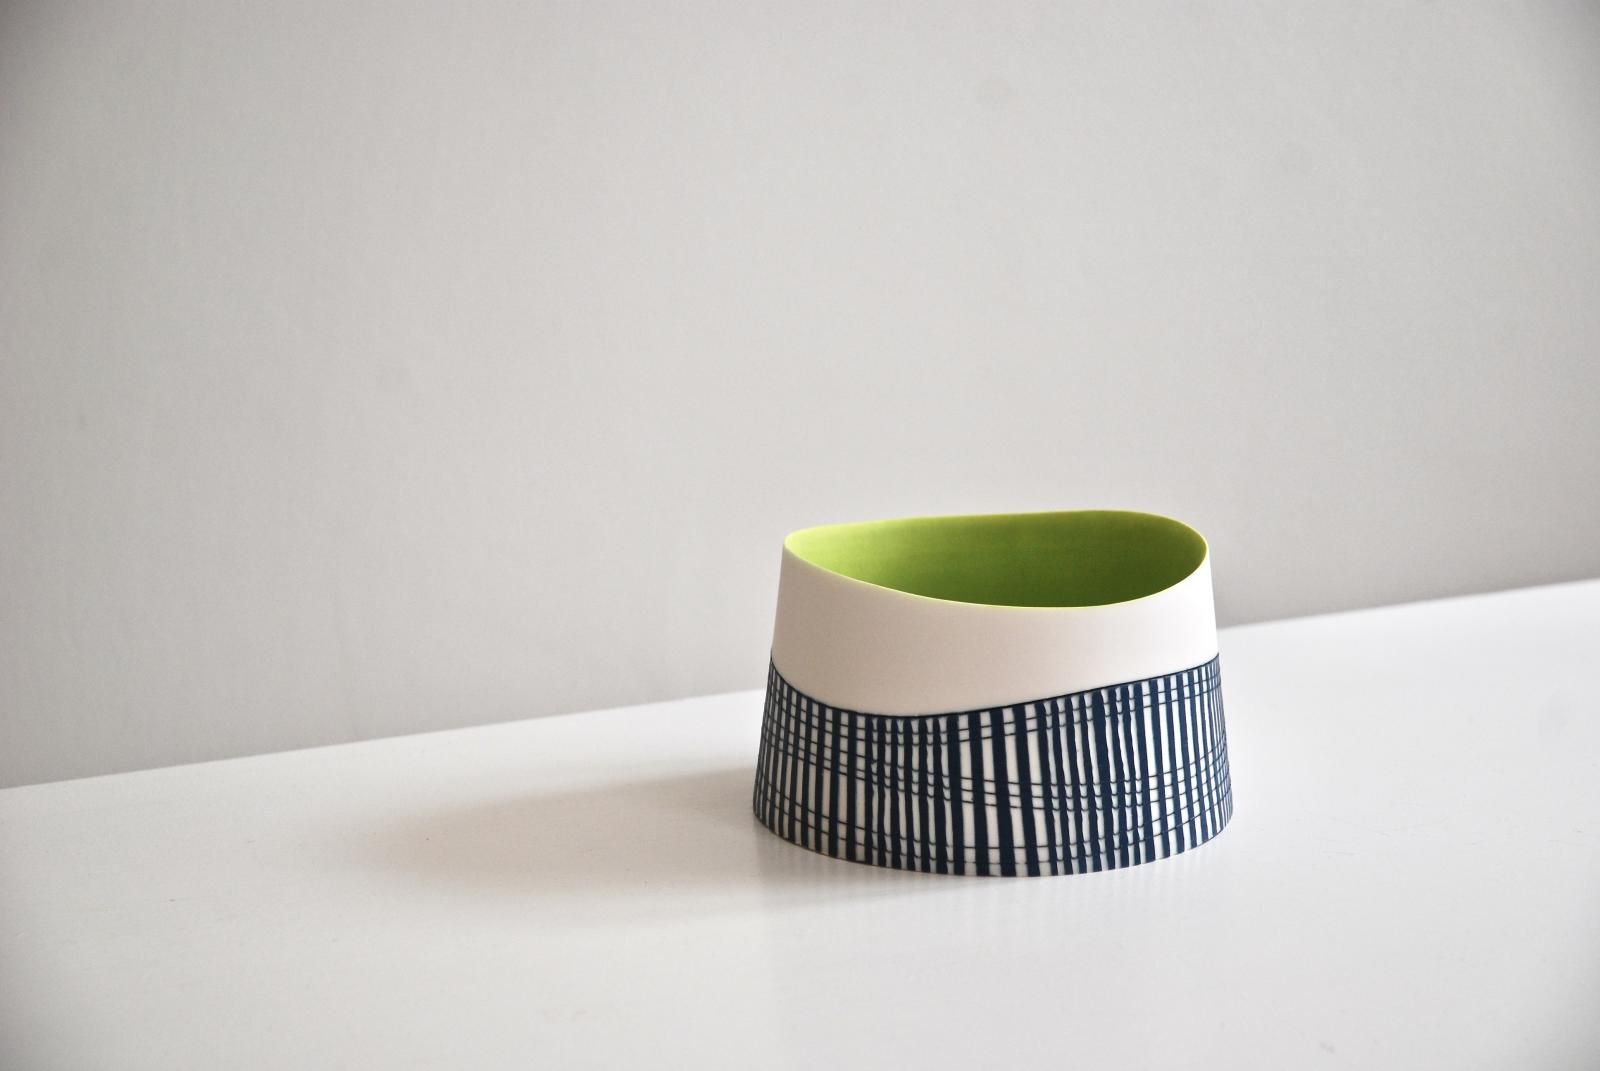 Bowl with Chartreuse Interior by Lara Scobie